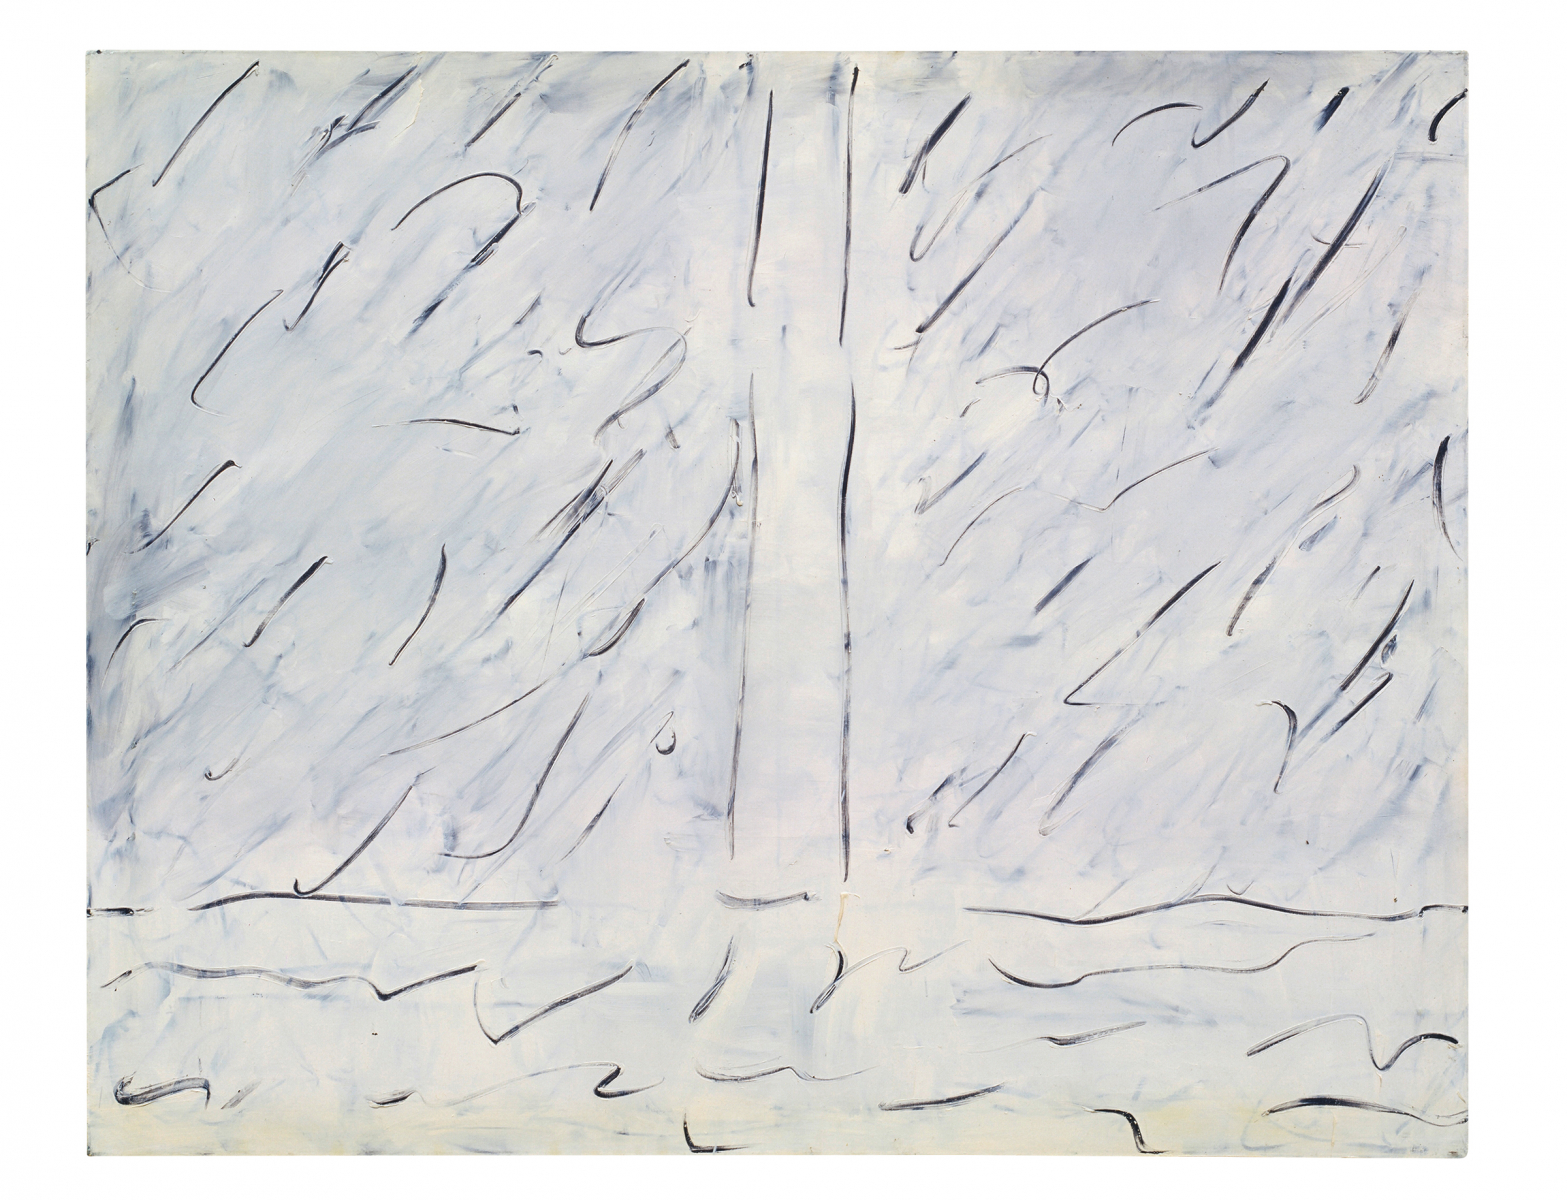 Untitled-86019, 1986, Oil on Canvas, 127.4x158cm